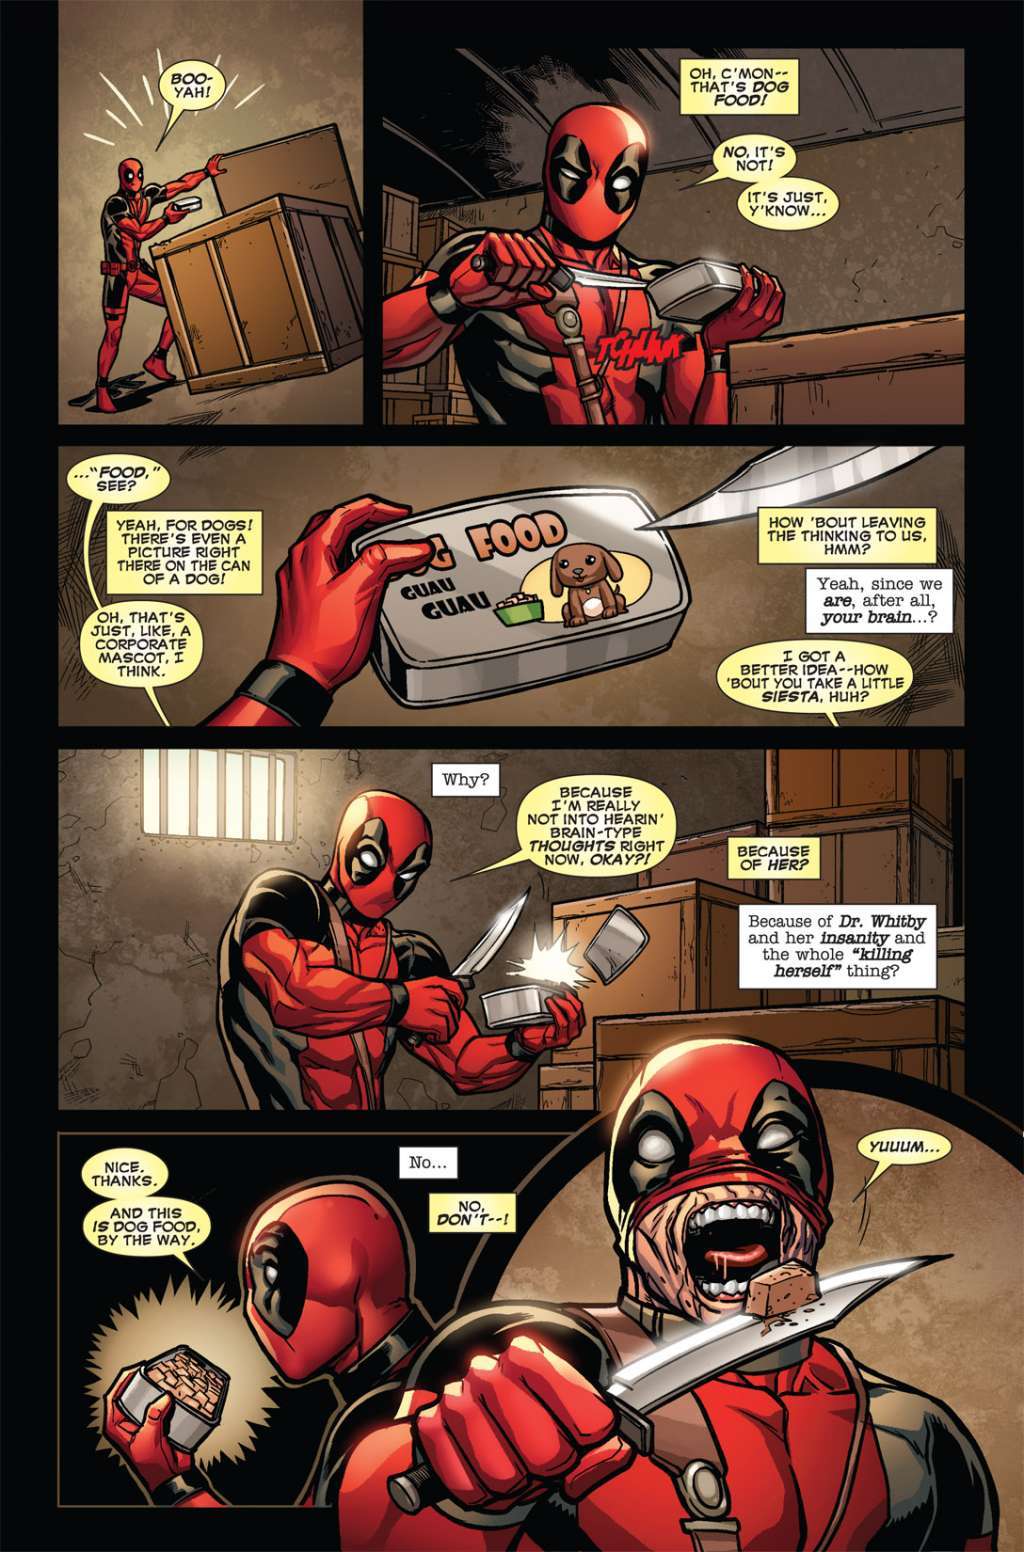 MERC WITH A MOUTH Deadpool - YouTube